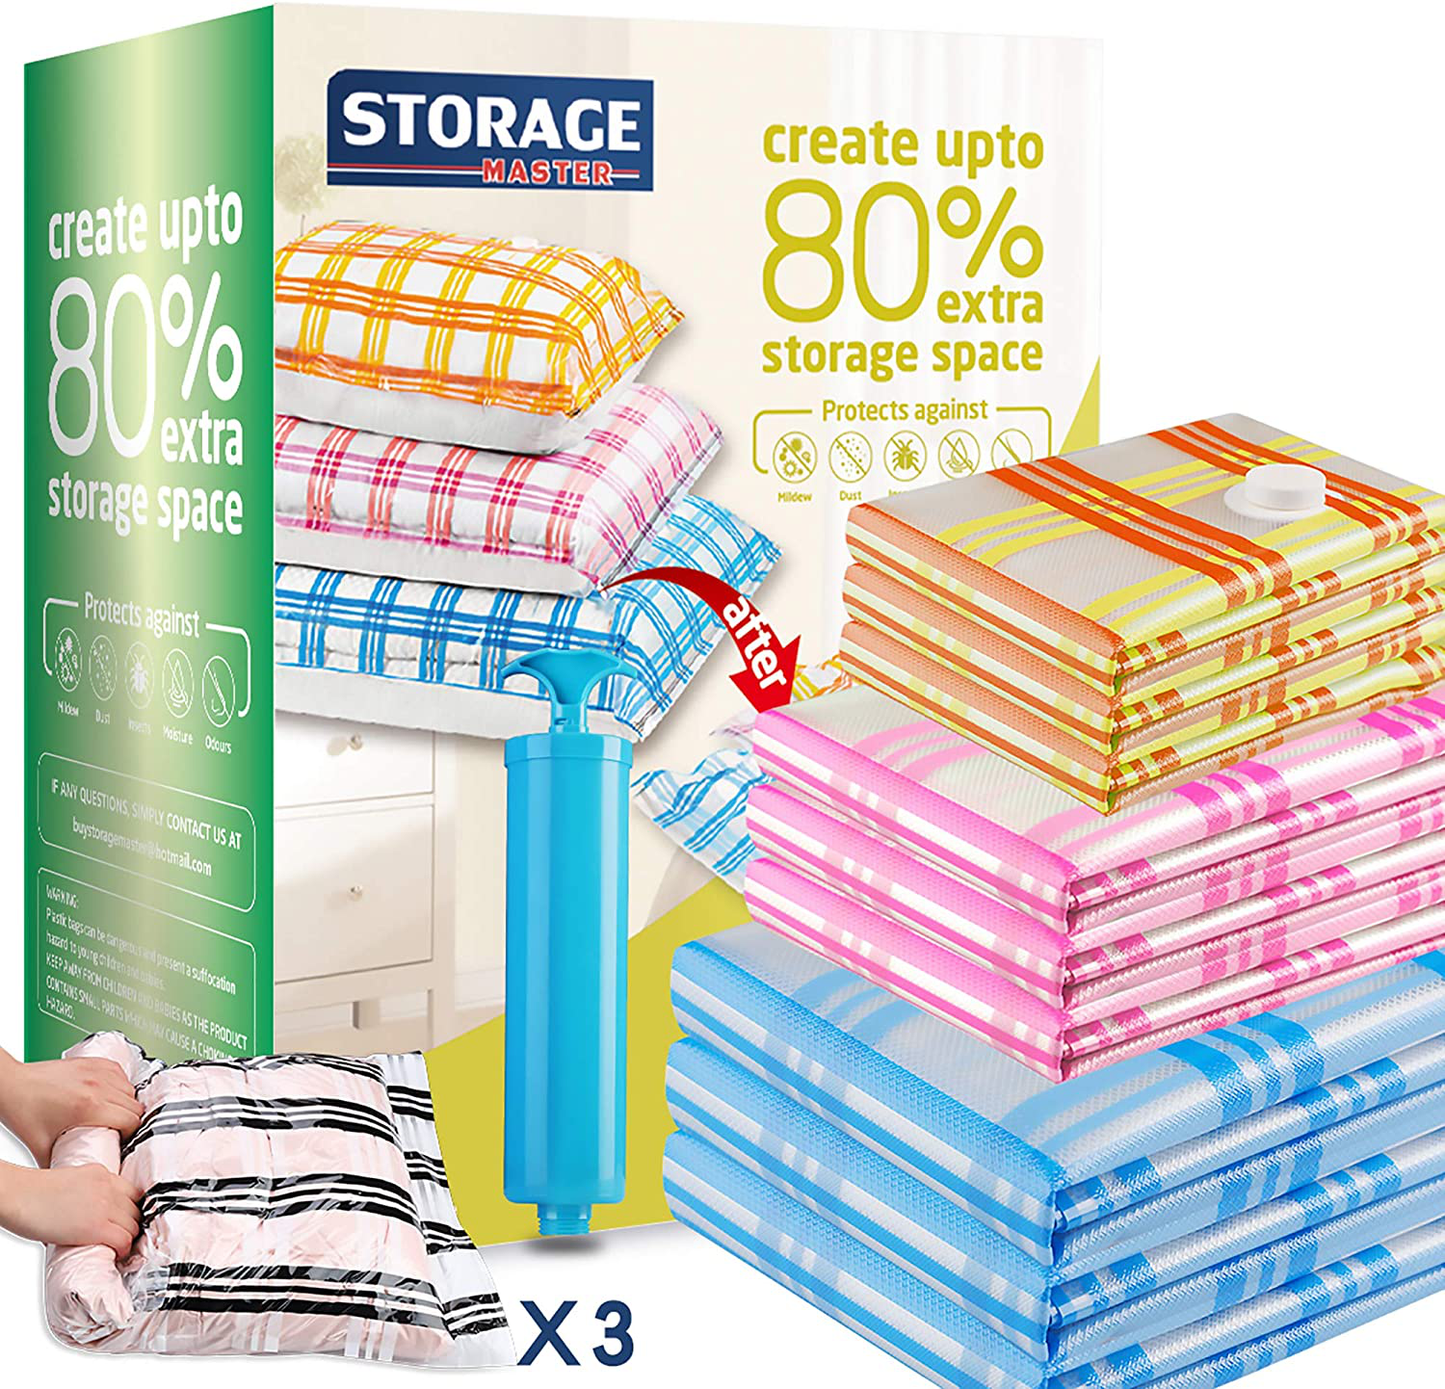 Storage Master 12 Vacuum Storage Bags, Space Saver Bags, 12-Pack (3 Jumbo, 3 Large, 3 Medium, 3 Roll-Up) with Hand Pump (12-Combo)